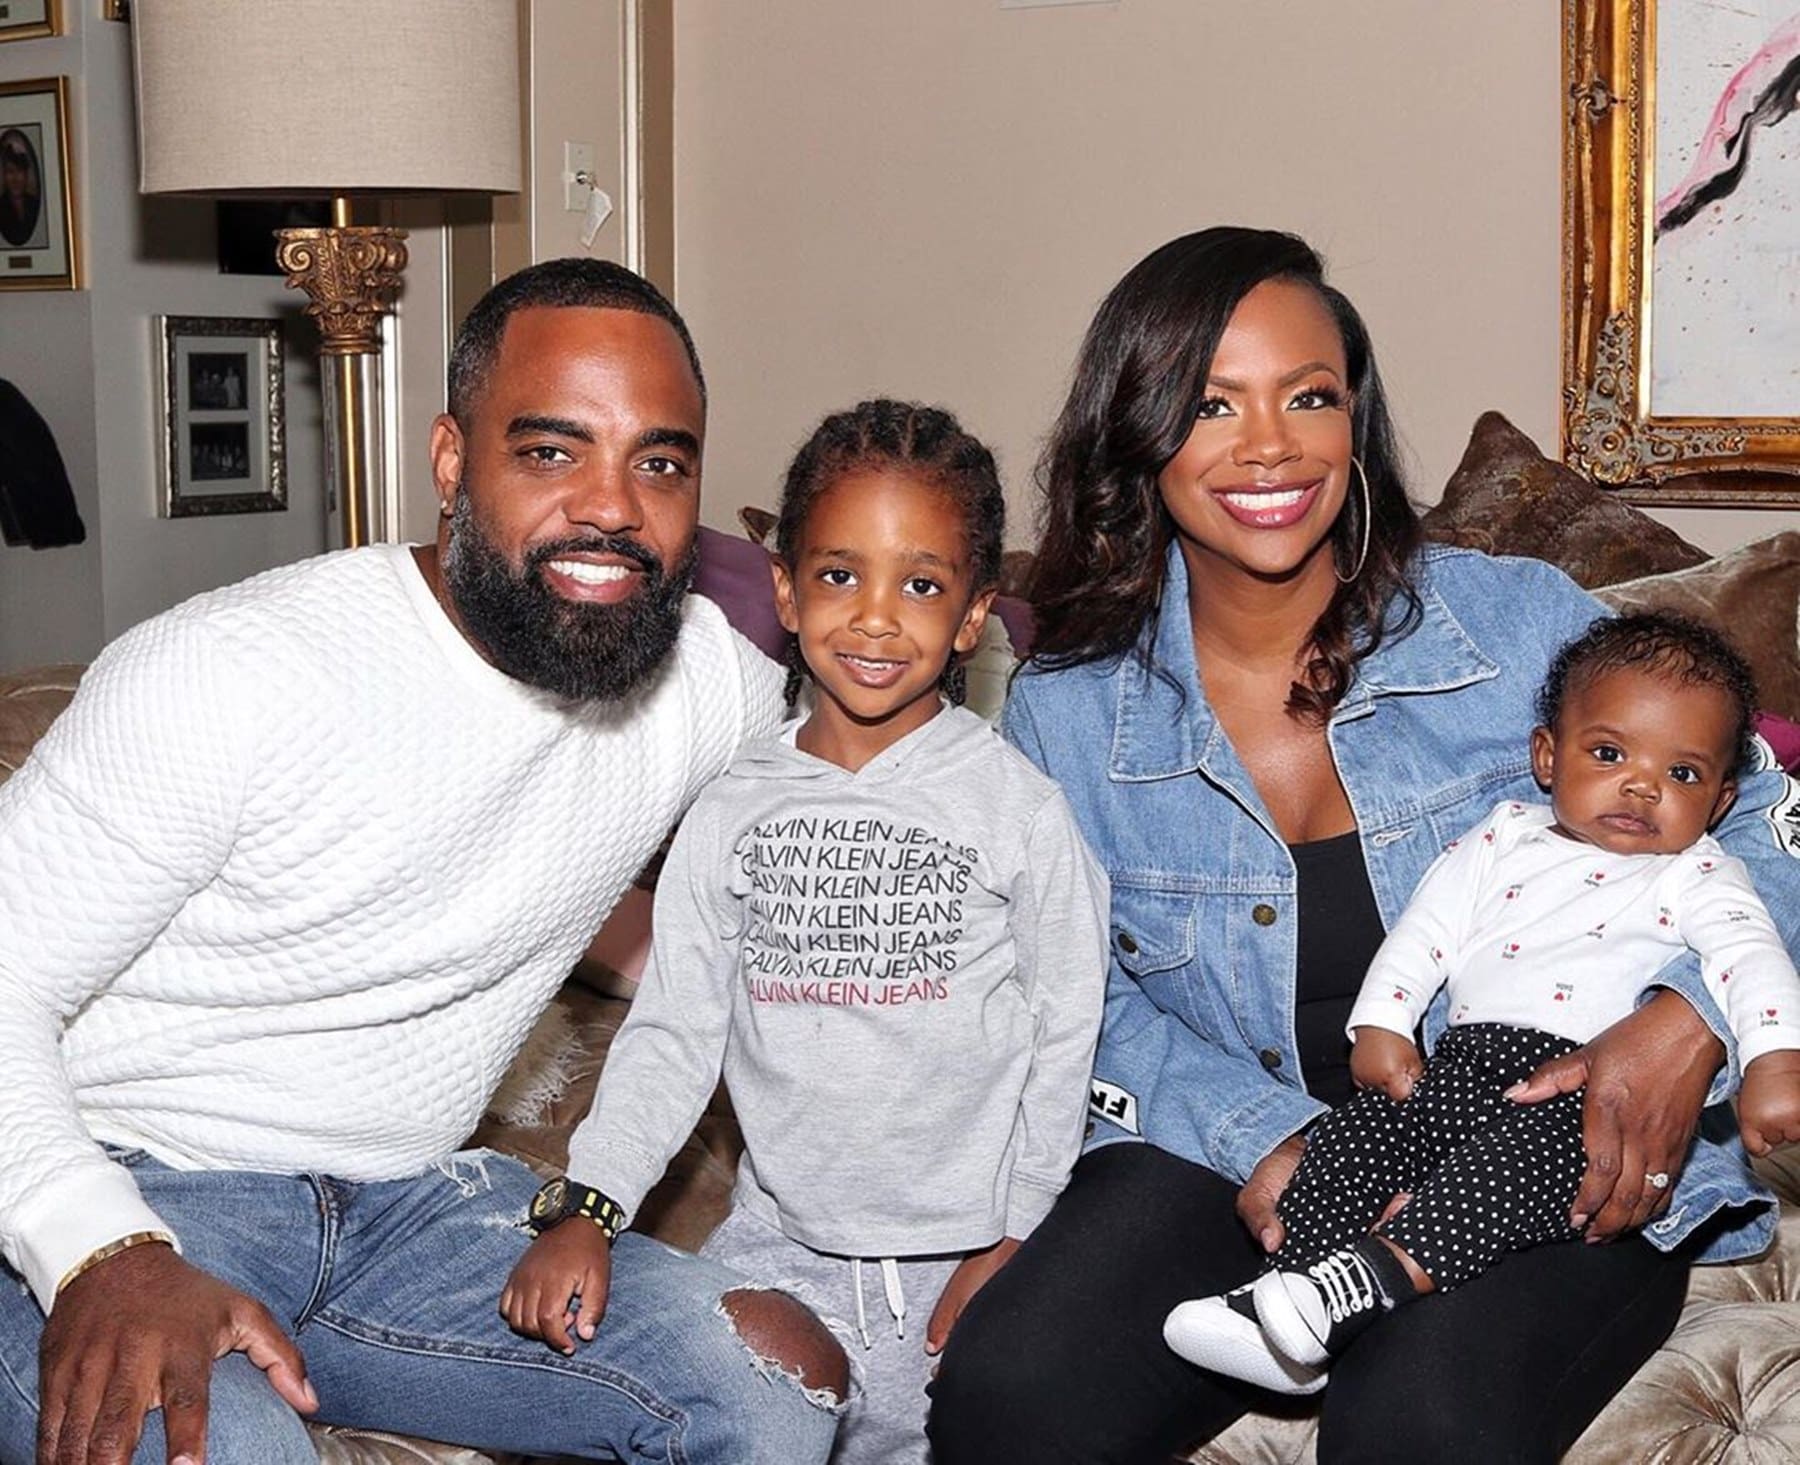 Kandi Burruss Shares A Sweet Photo Of Todd Tucker And Blaze Tucker And Fans Are In Awe